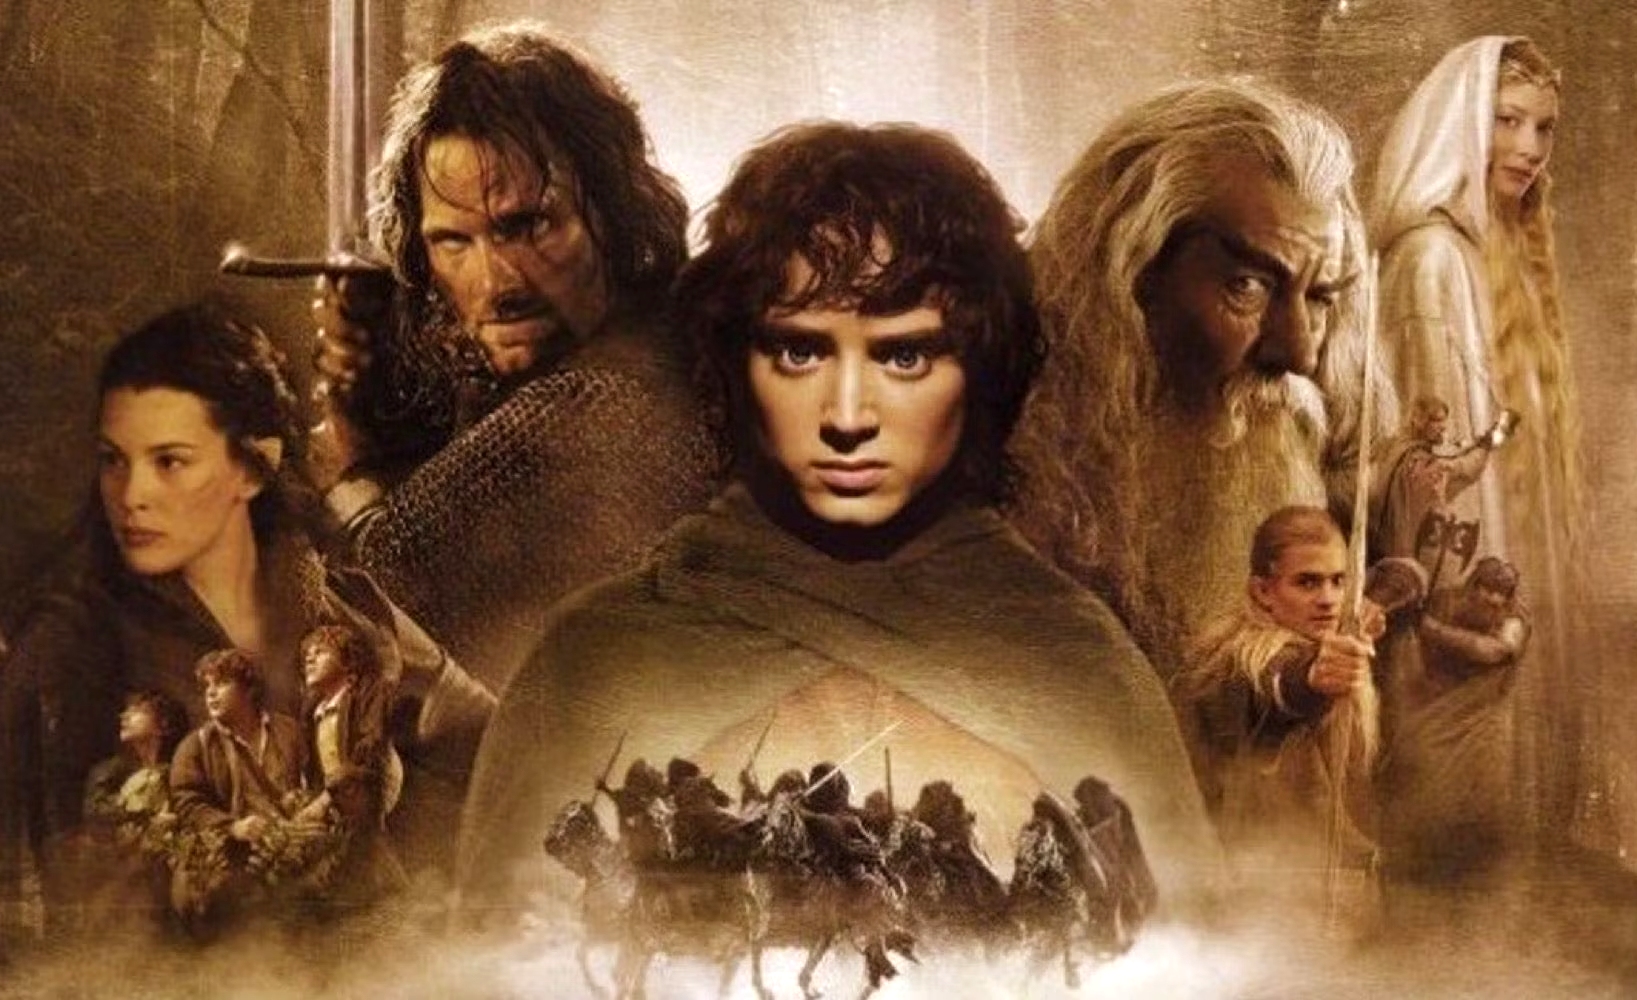 The Lord of the Rings: The Motion Picture Trilogy - Movies on Google Play